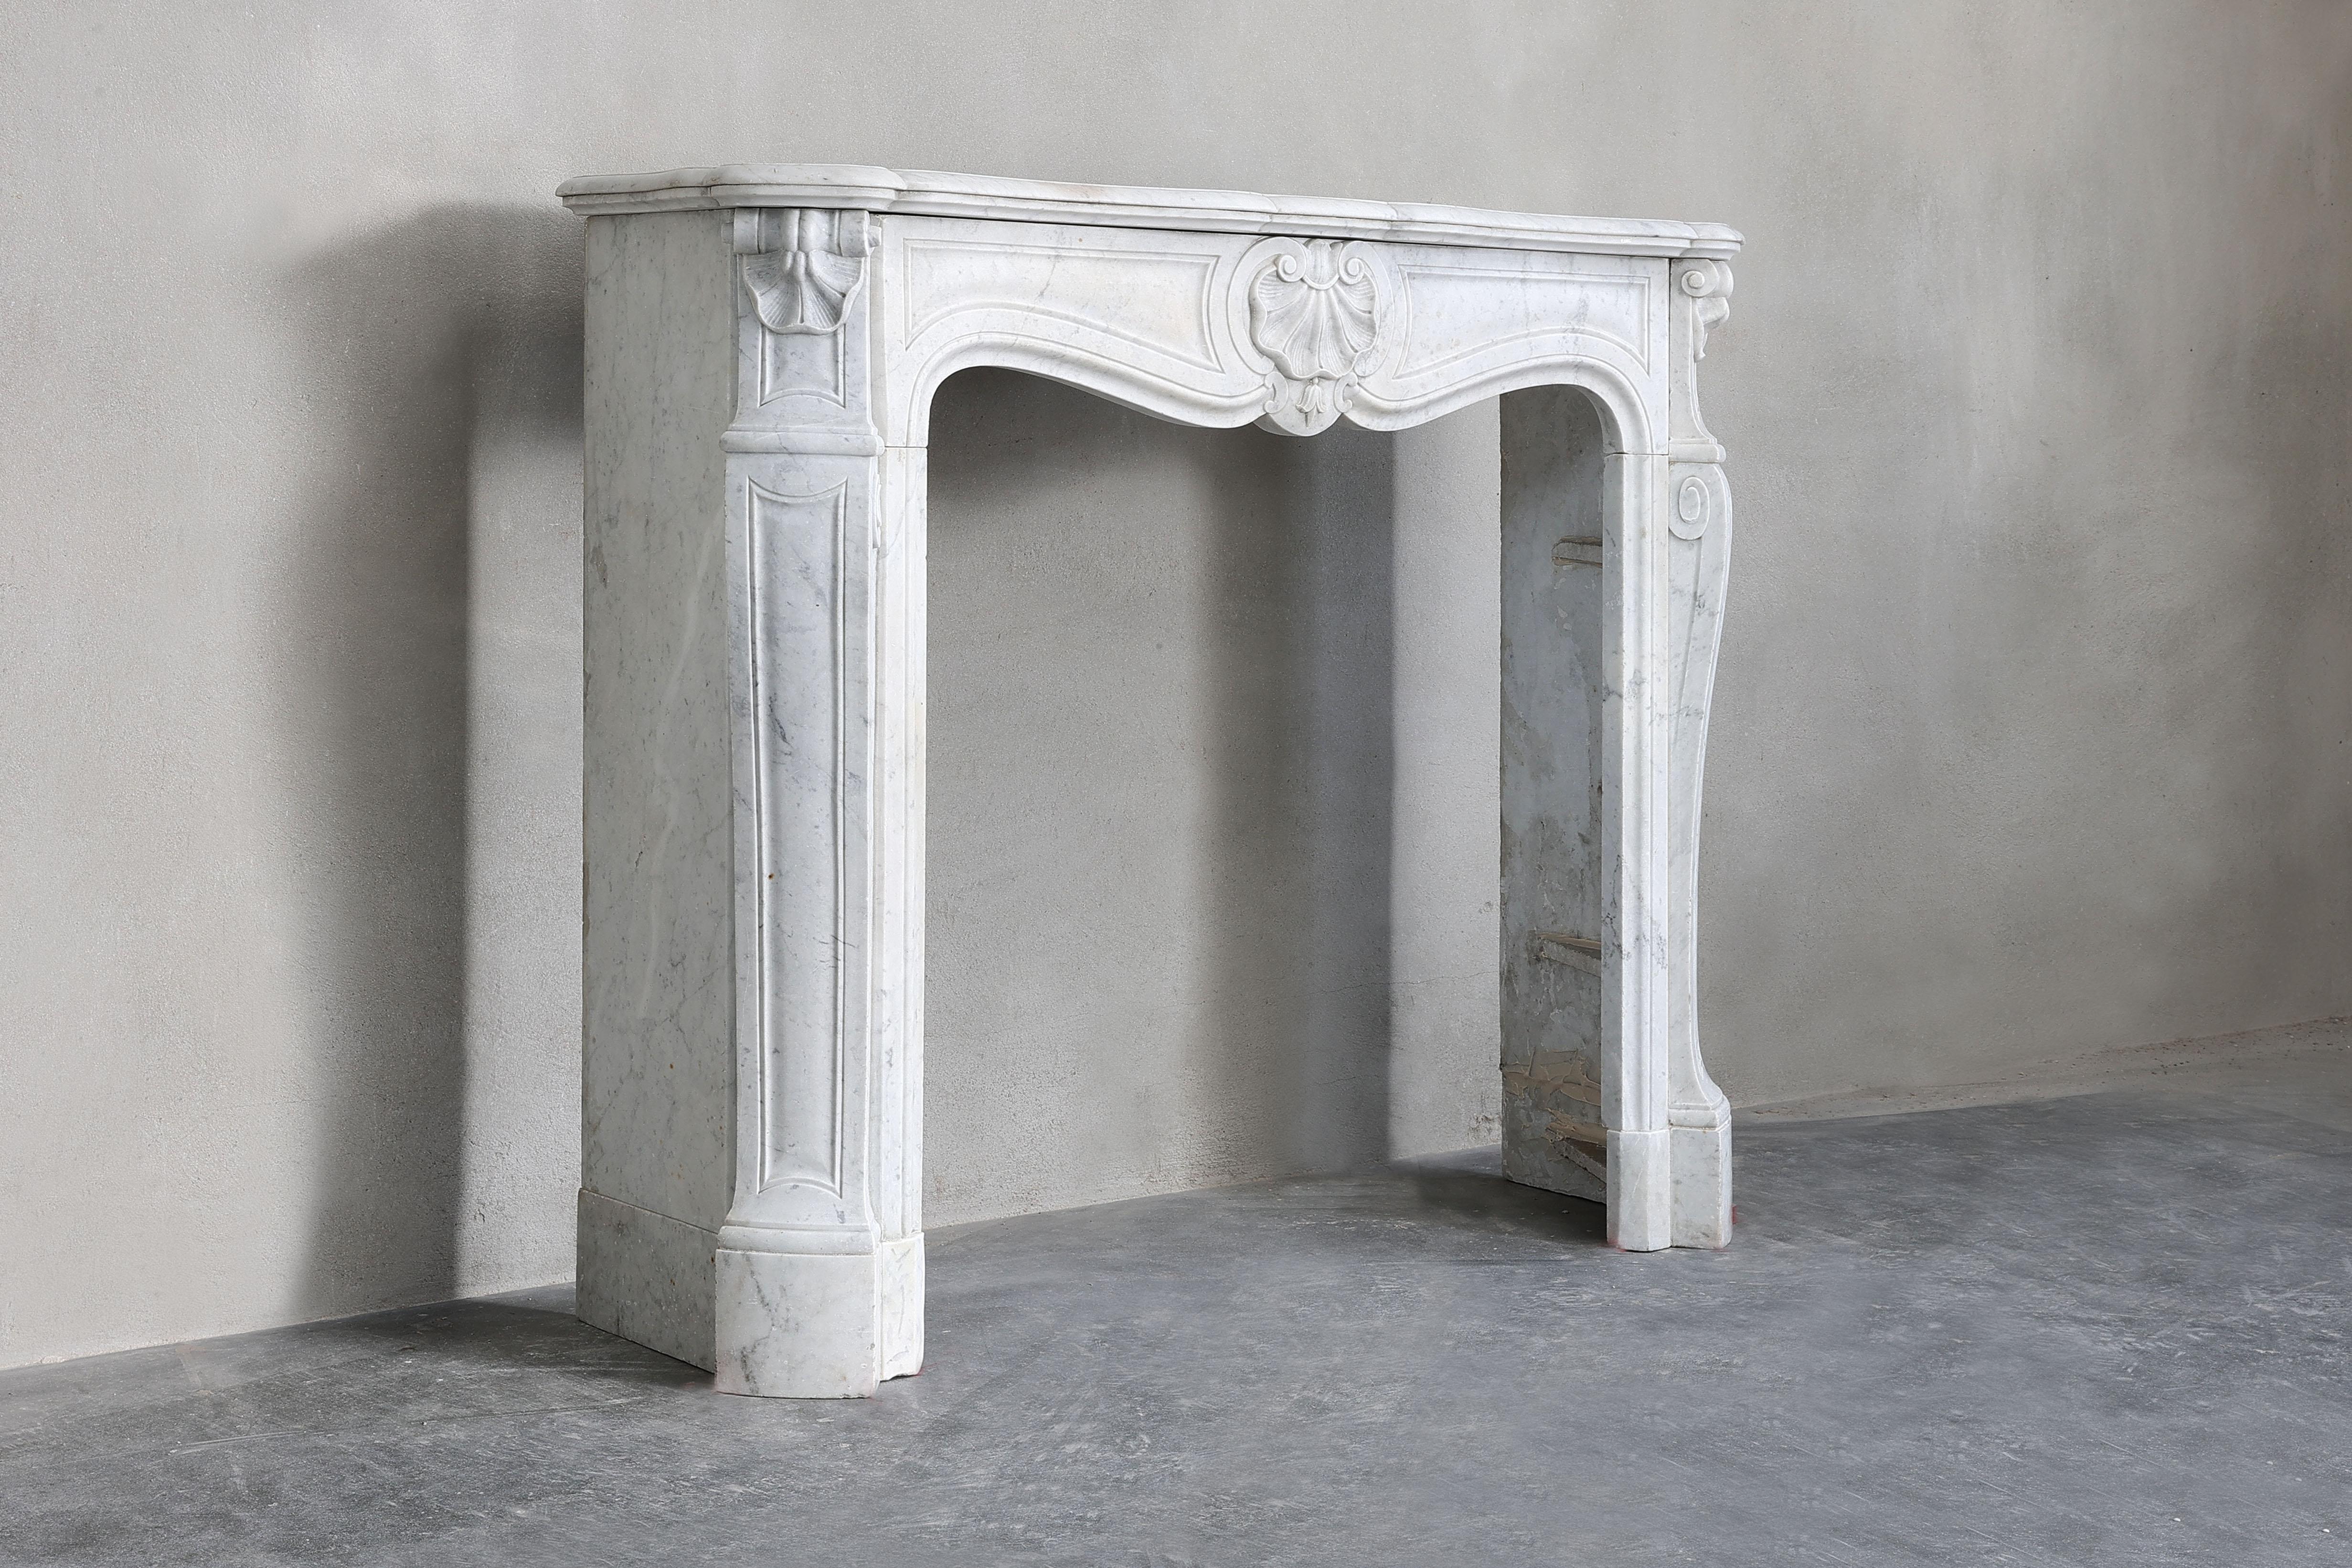 Beautiful antique fireplace of the Italian Carrara marble in the style of Louis XV. This chimney has a compact size, making it suitable for many interiors. The fireplace dates from the 19th century and is equipped with 'trois coquilles' and has